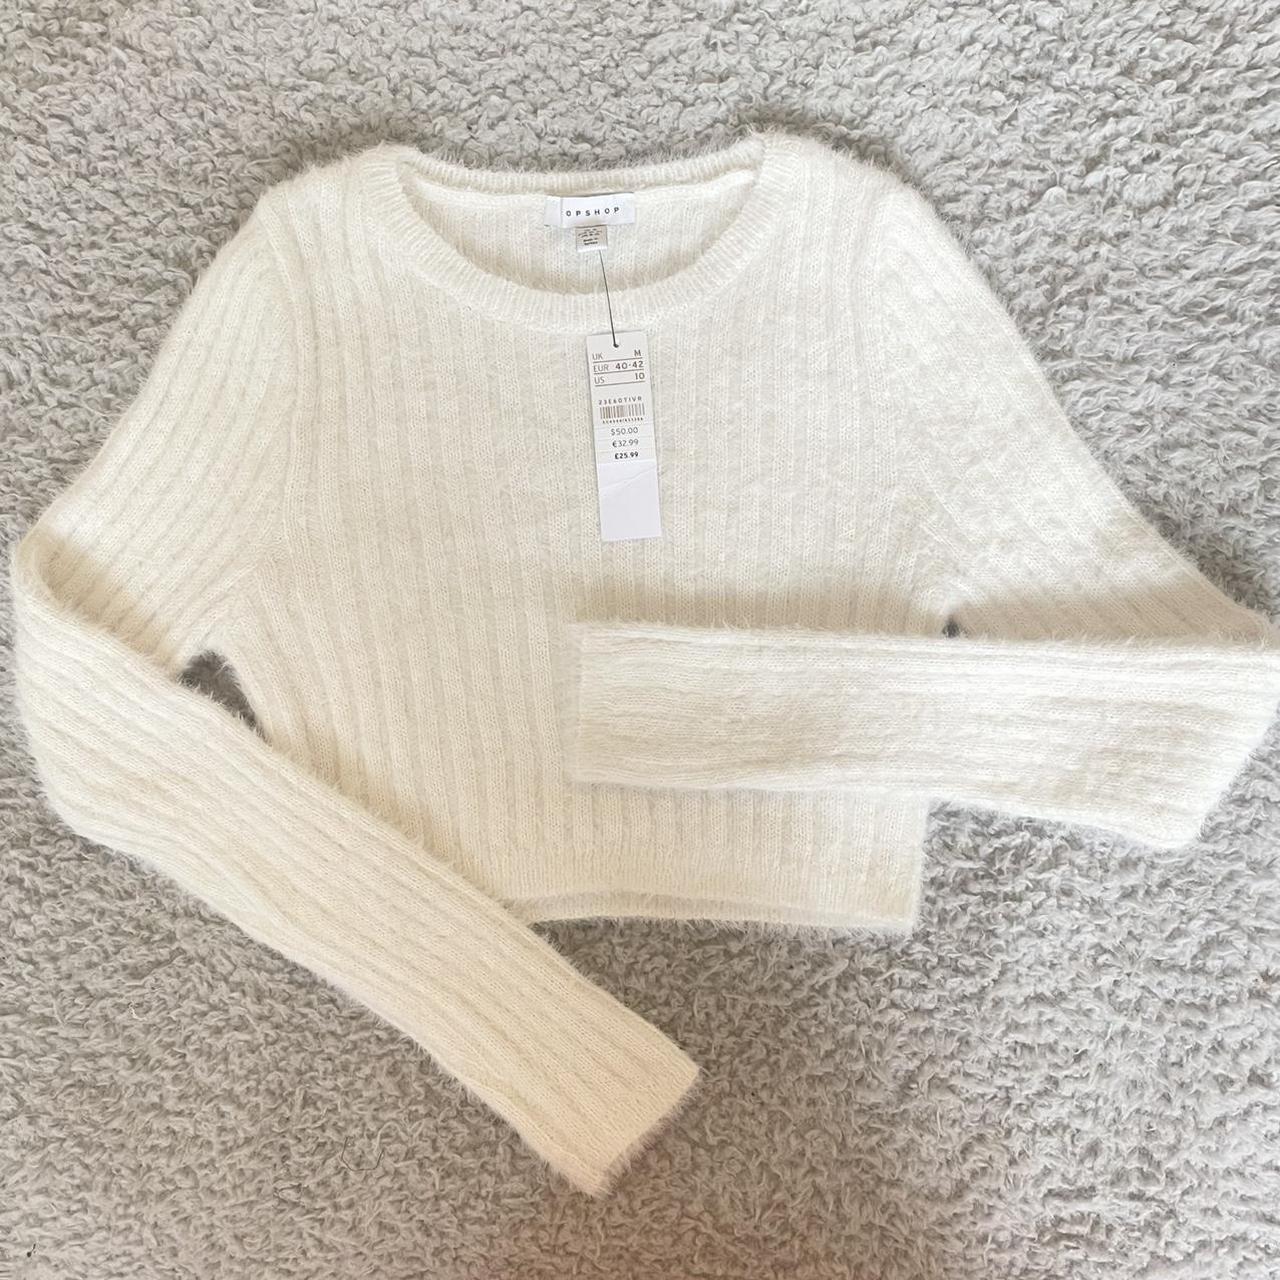 TOPSHOP knitted fluffy rib crop jumper in white/off... - Depop